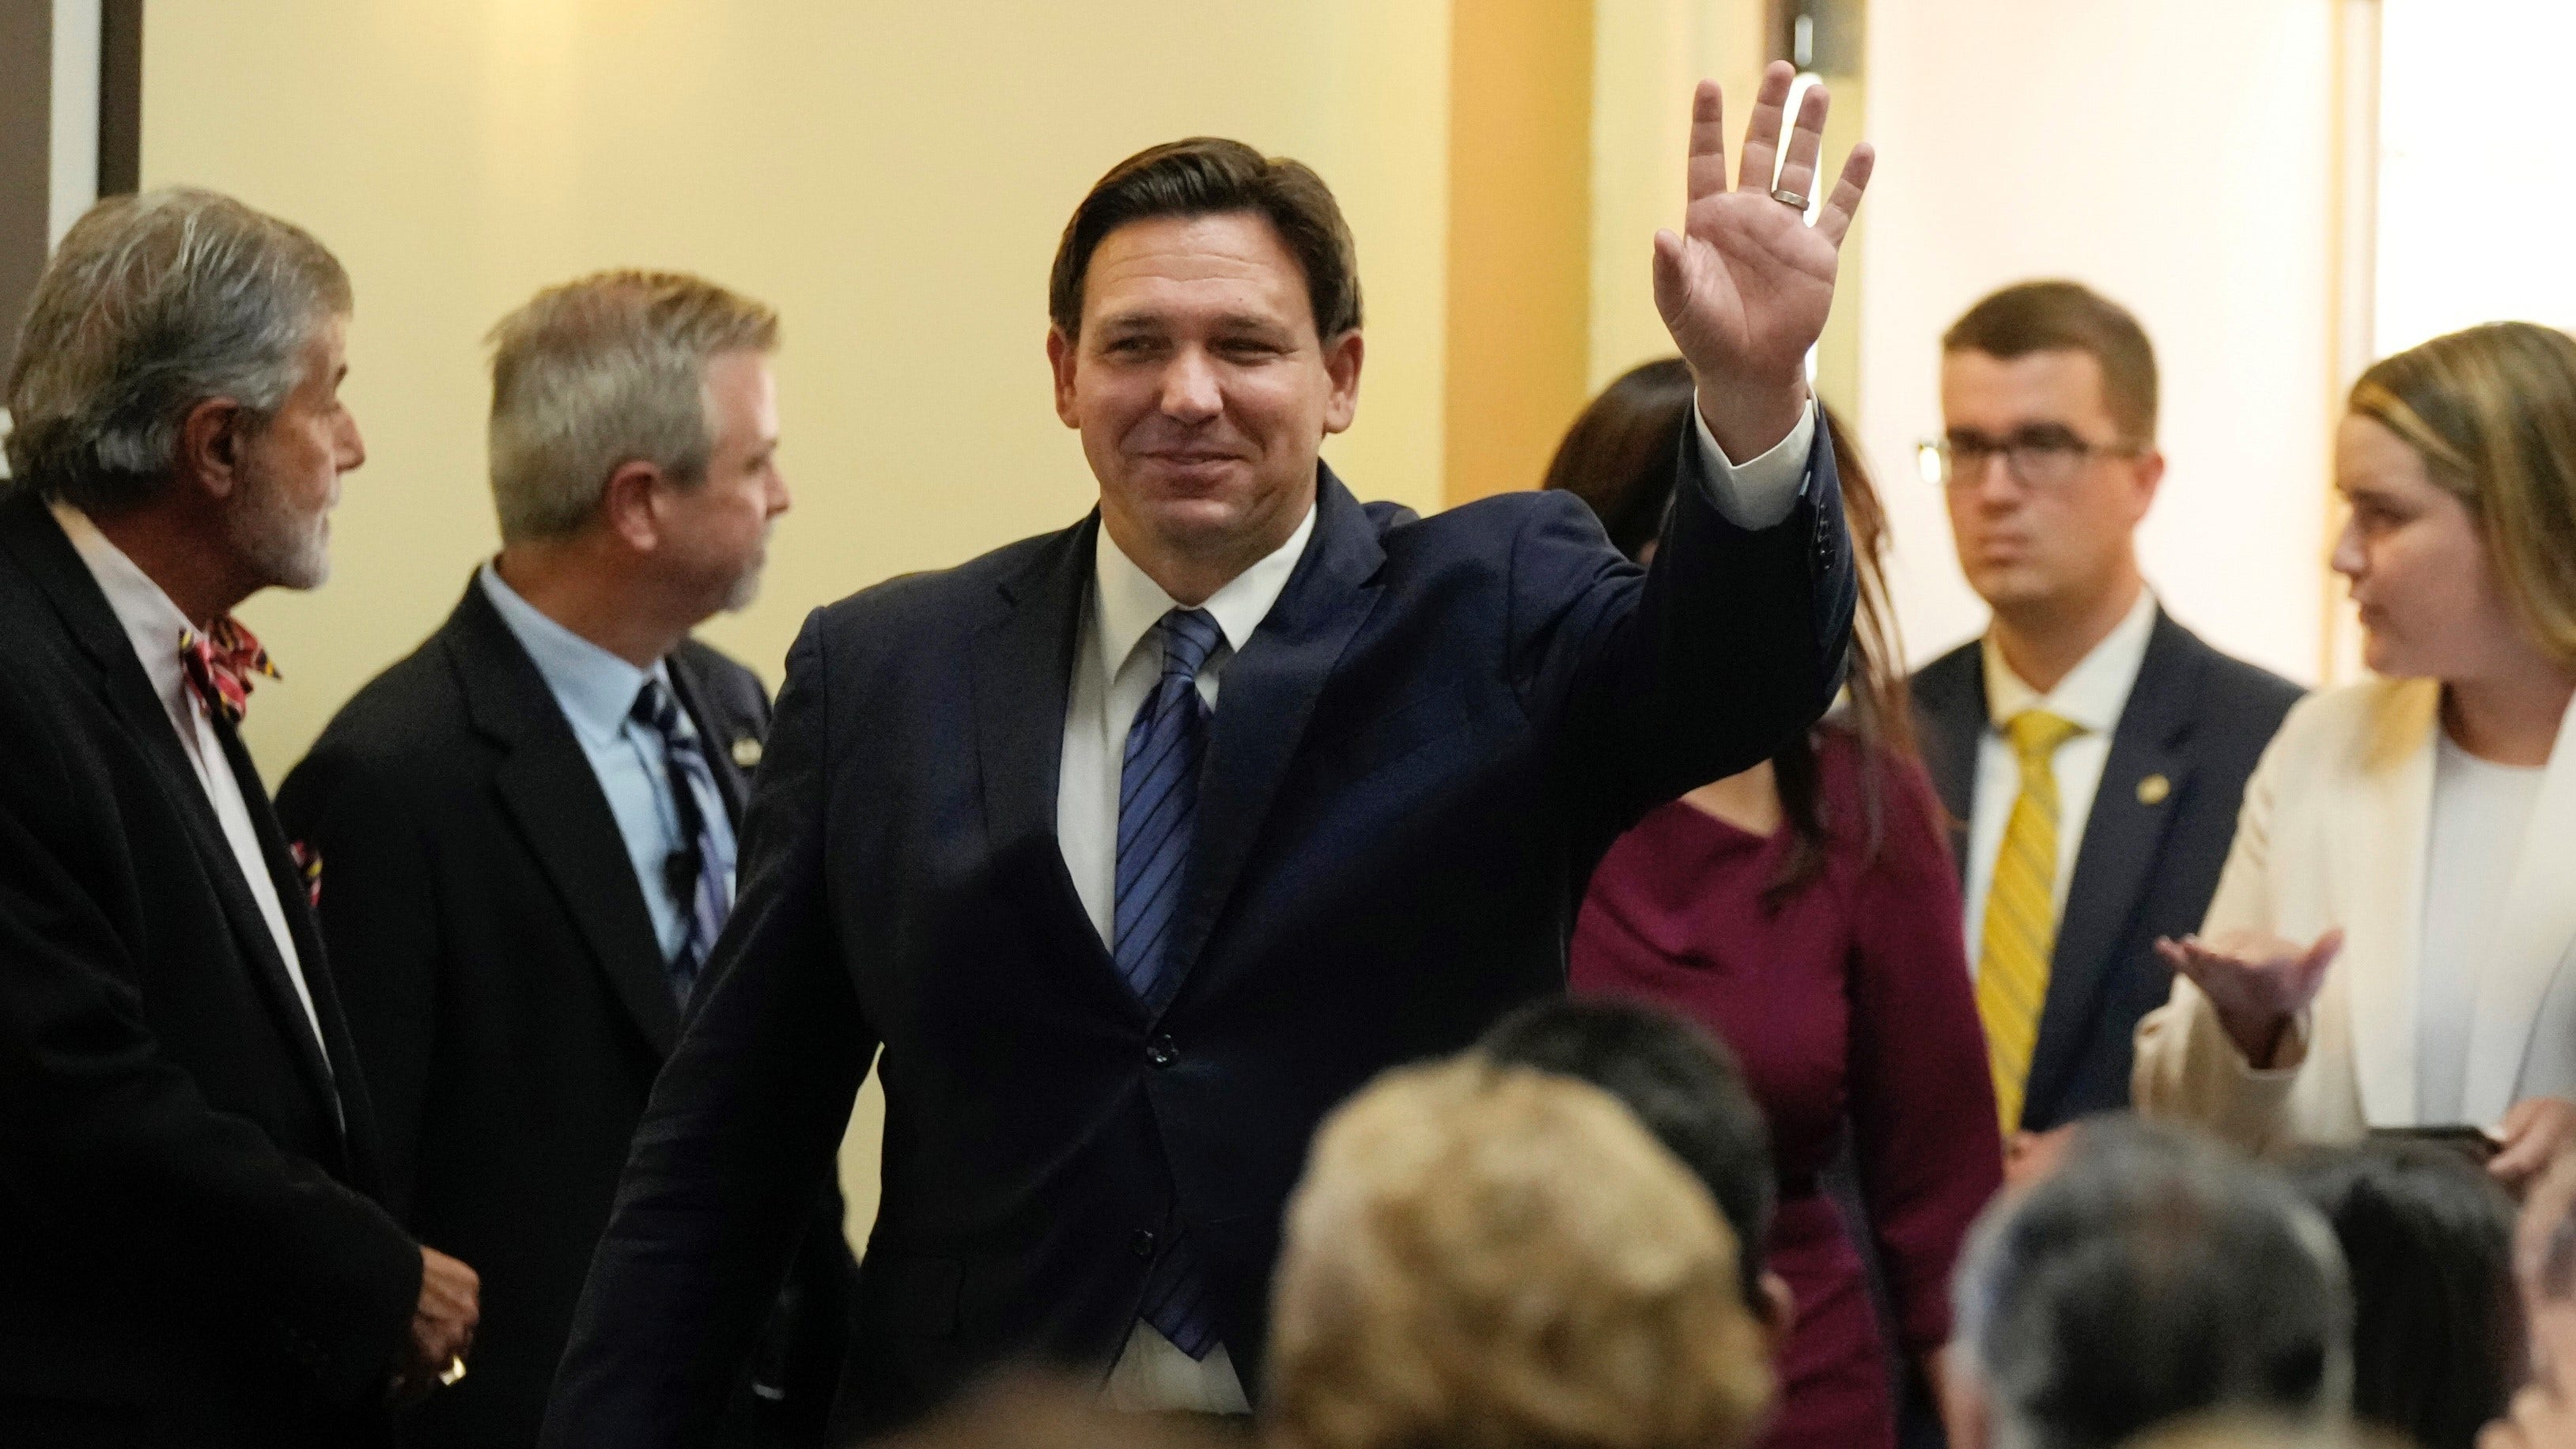 DeSantis ad spotlights mother whose son was killed in auto accident by illegal immigrant driver